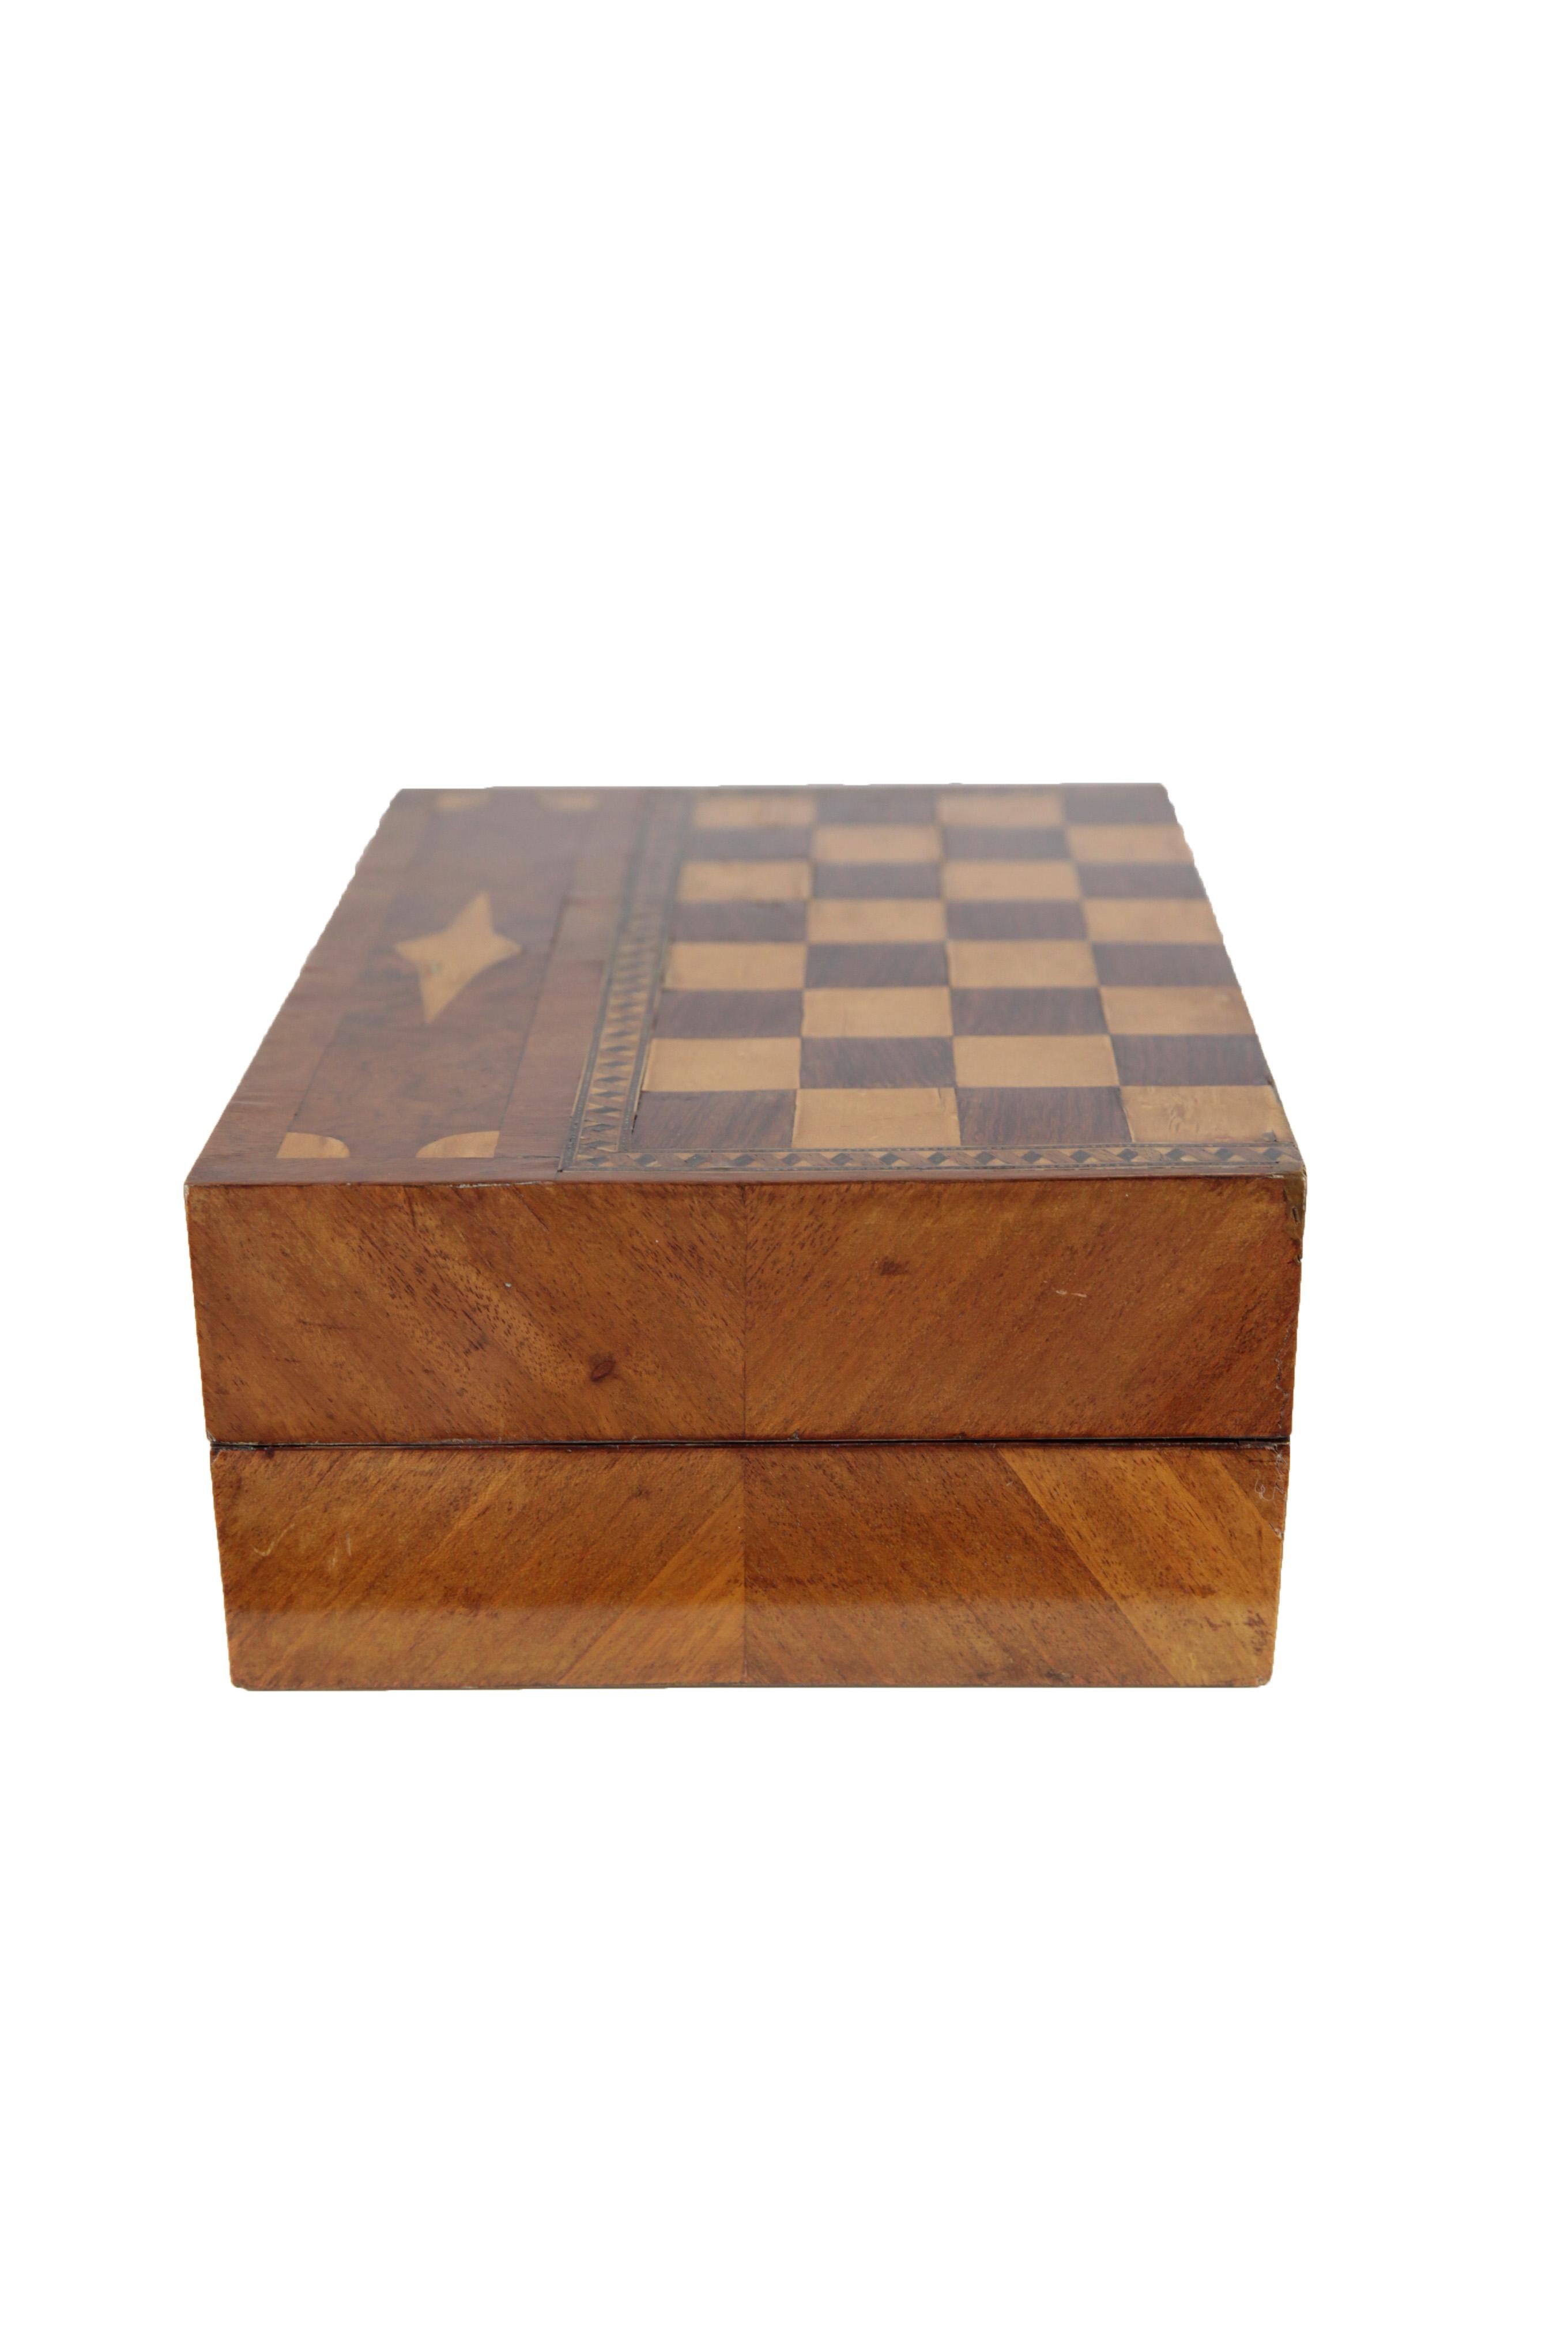 1920s Chess and Play Casket, Mahogany and Maple Veneer and Marquetry, Red Brown im Zustand „Gut“ im Angebot in Muenster, NRW